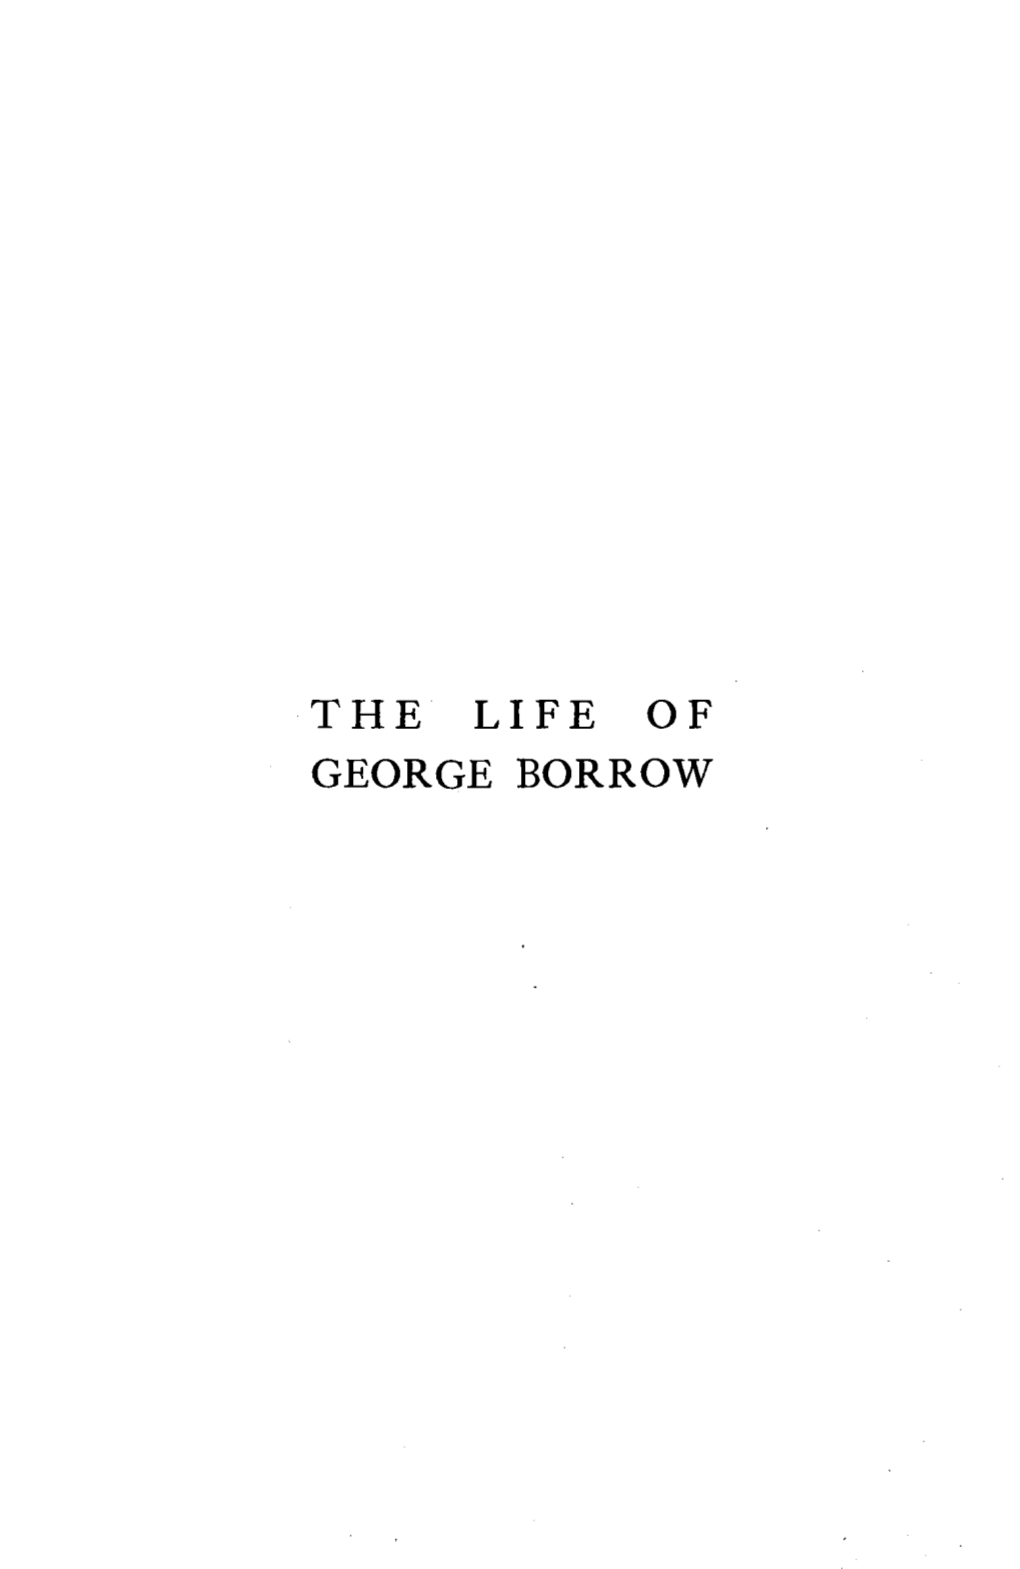 THE LIFE of GEORGE BORROW Thrrrnas L'b.Illip ~.RA.Pl..Ll.JI the LIFE of GEORGE BORROW COMPILED from UNPUBLISHED OFFICIAL DOCUMENTS, HIS WORKS, CORRESPONDENCE, ETC